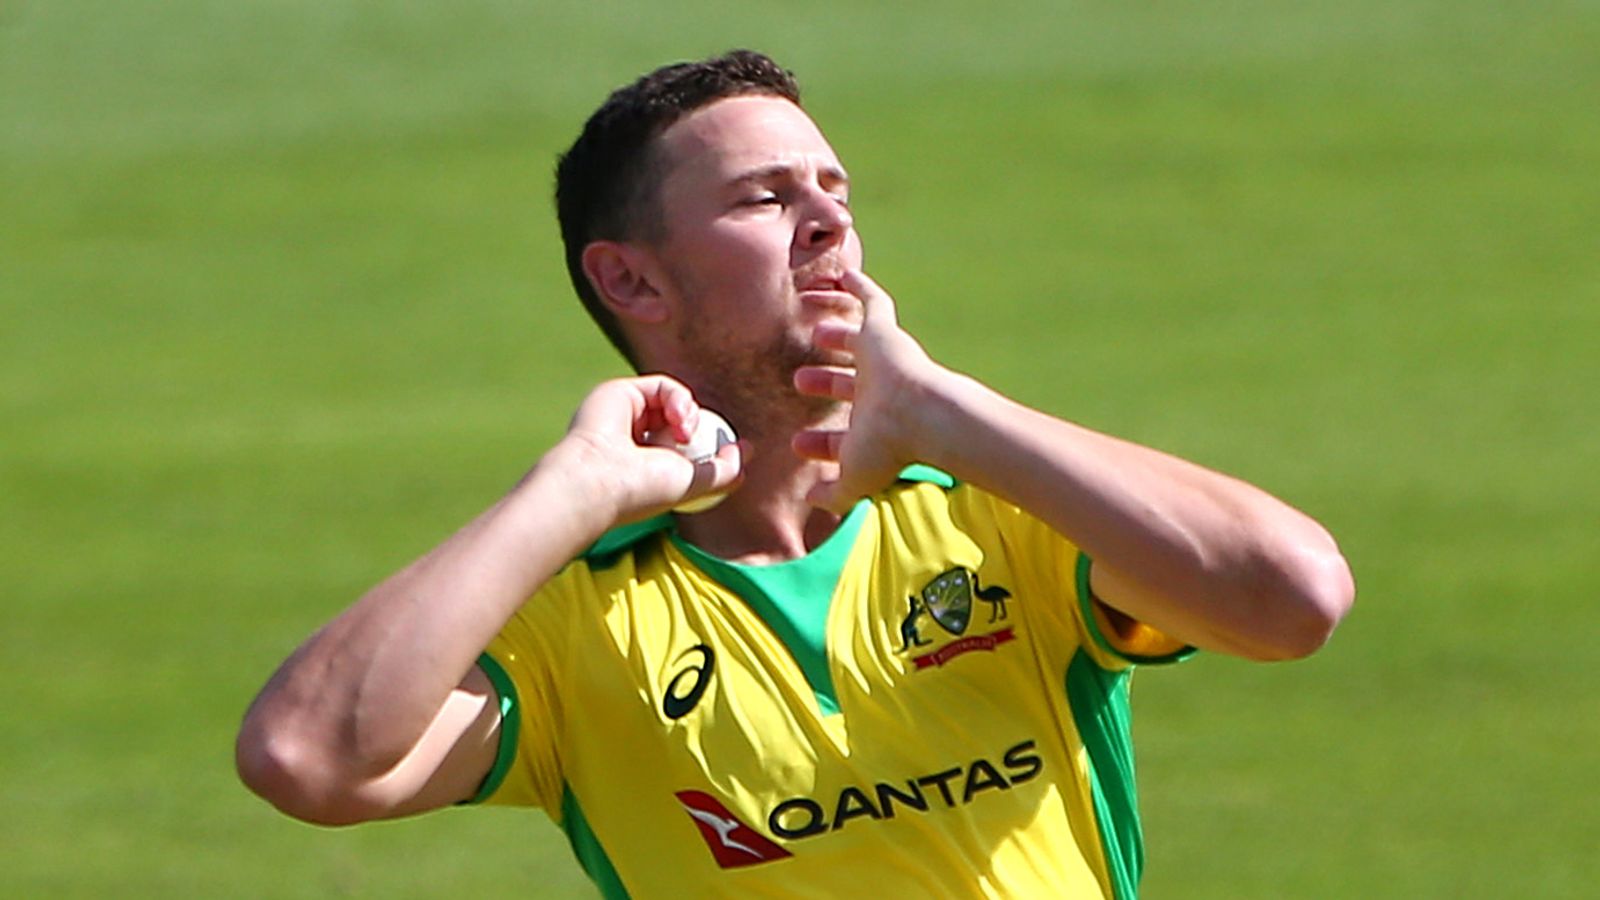 Josh Hazlewood says Australia expect to win every game they play but England series will be tough | Cricket News | Sky Sports